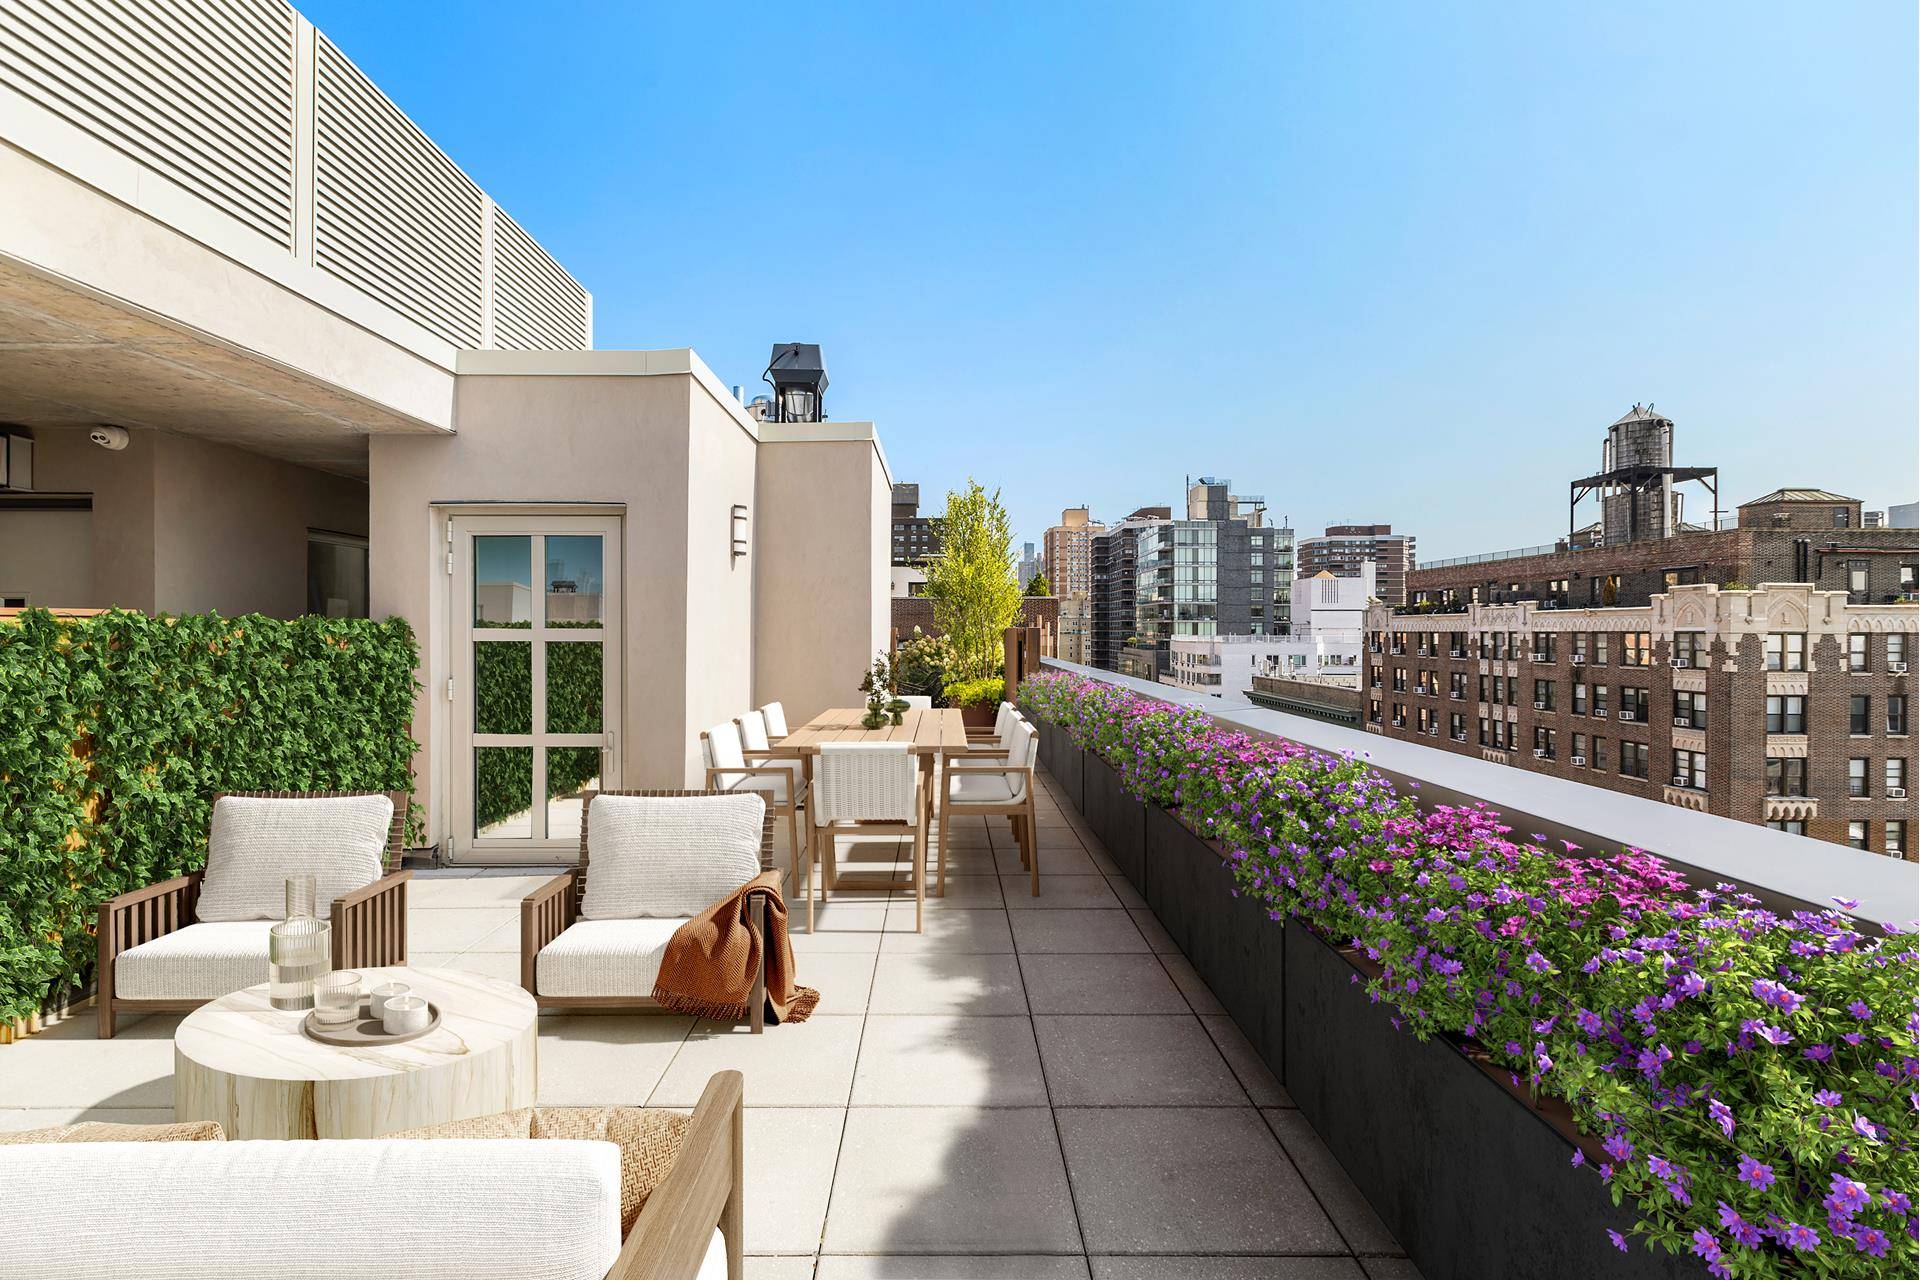 STUNNING 3 BR 3. 5 BA PENTHOUSE W PRIVATE TERRACE amp ; ARCHED WINDOWSIMMEDIATE OCCUPANCYNow offering 4 commission to outside brokers for a limited time.